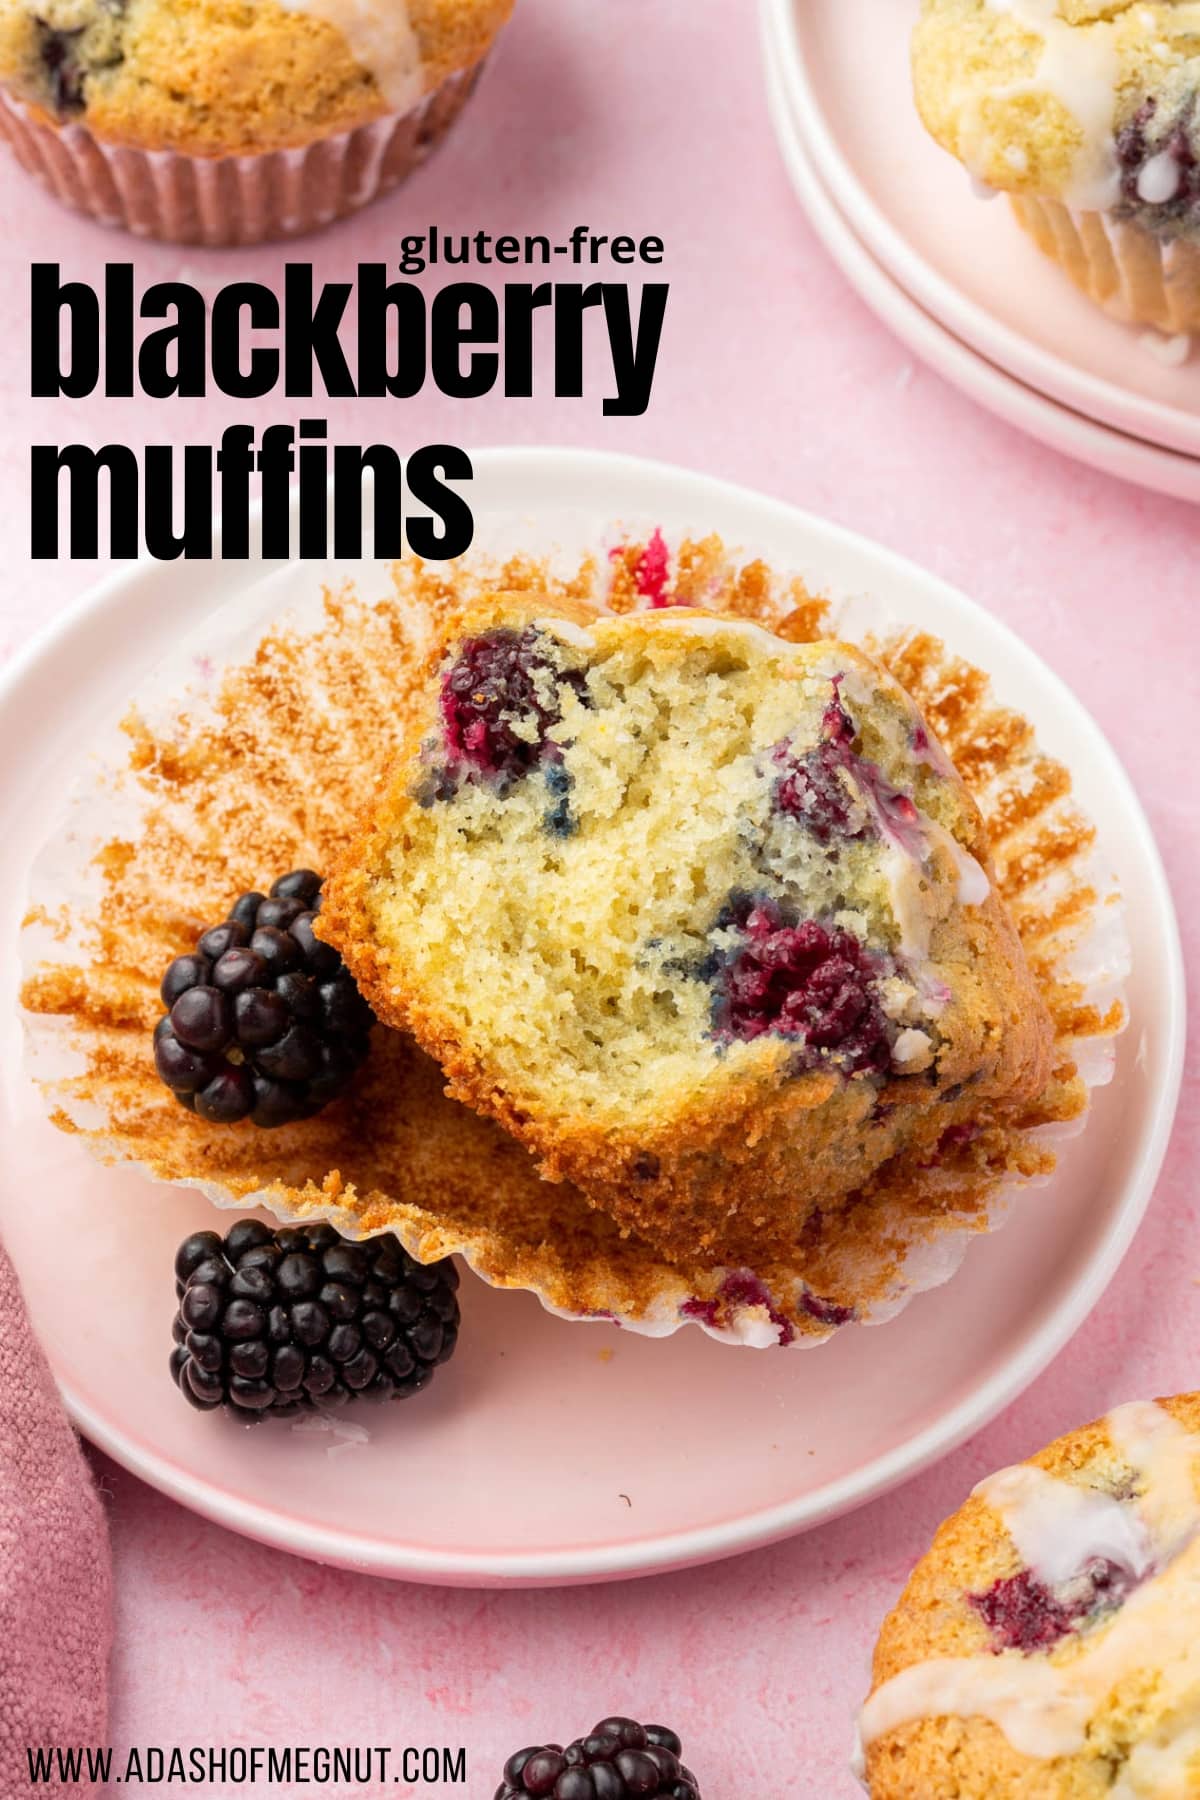 A single blackberry muffin with a bite taken out of it on a dessert plate with more muffins surrounding.